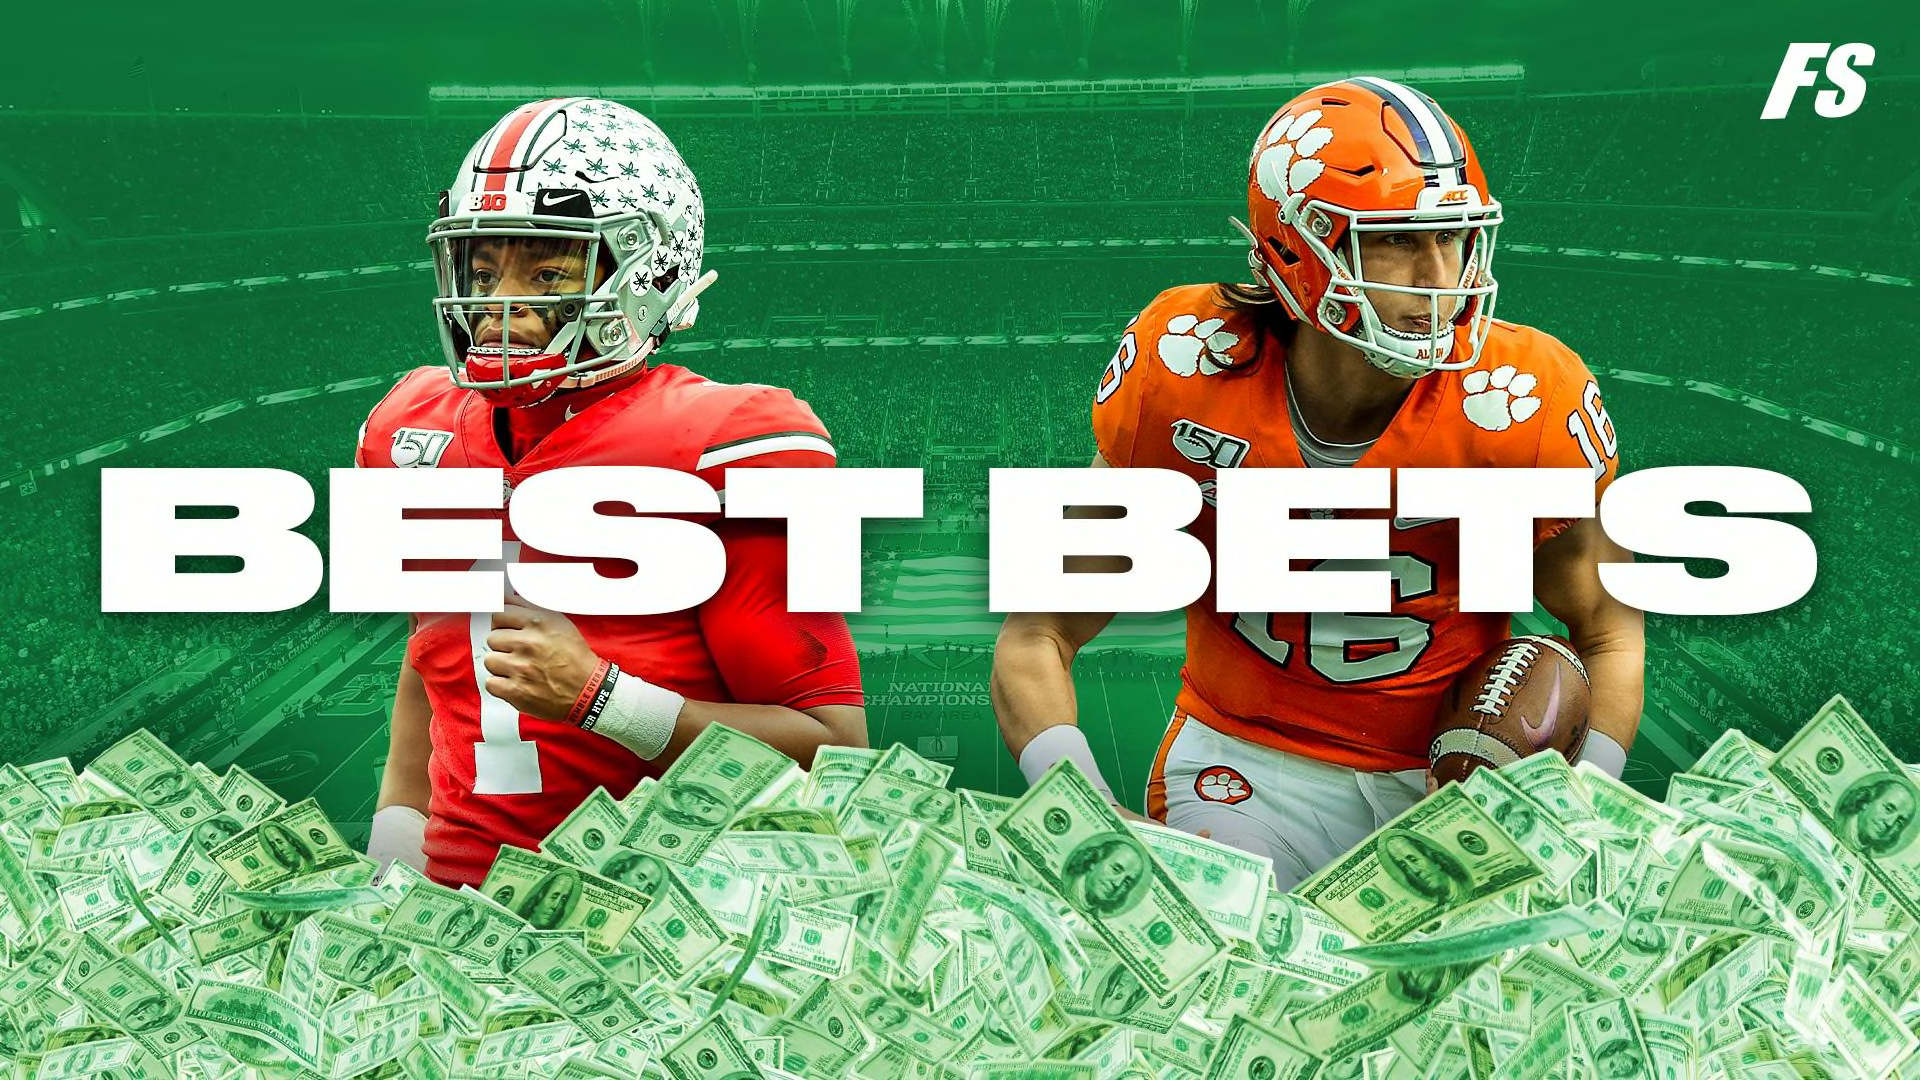 college football online betting